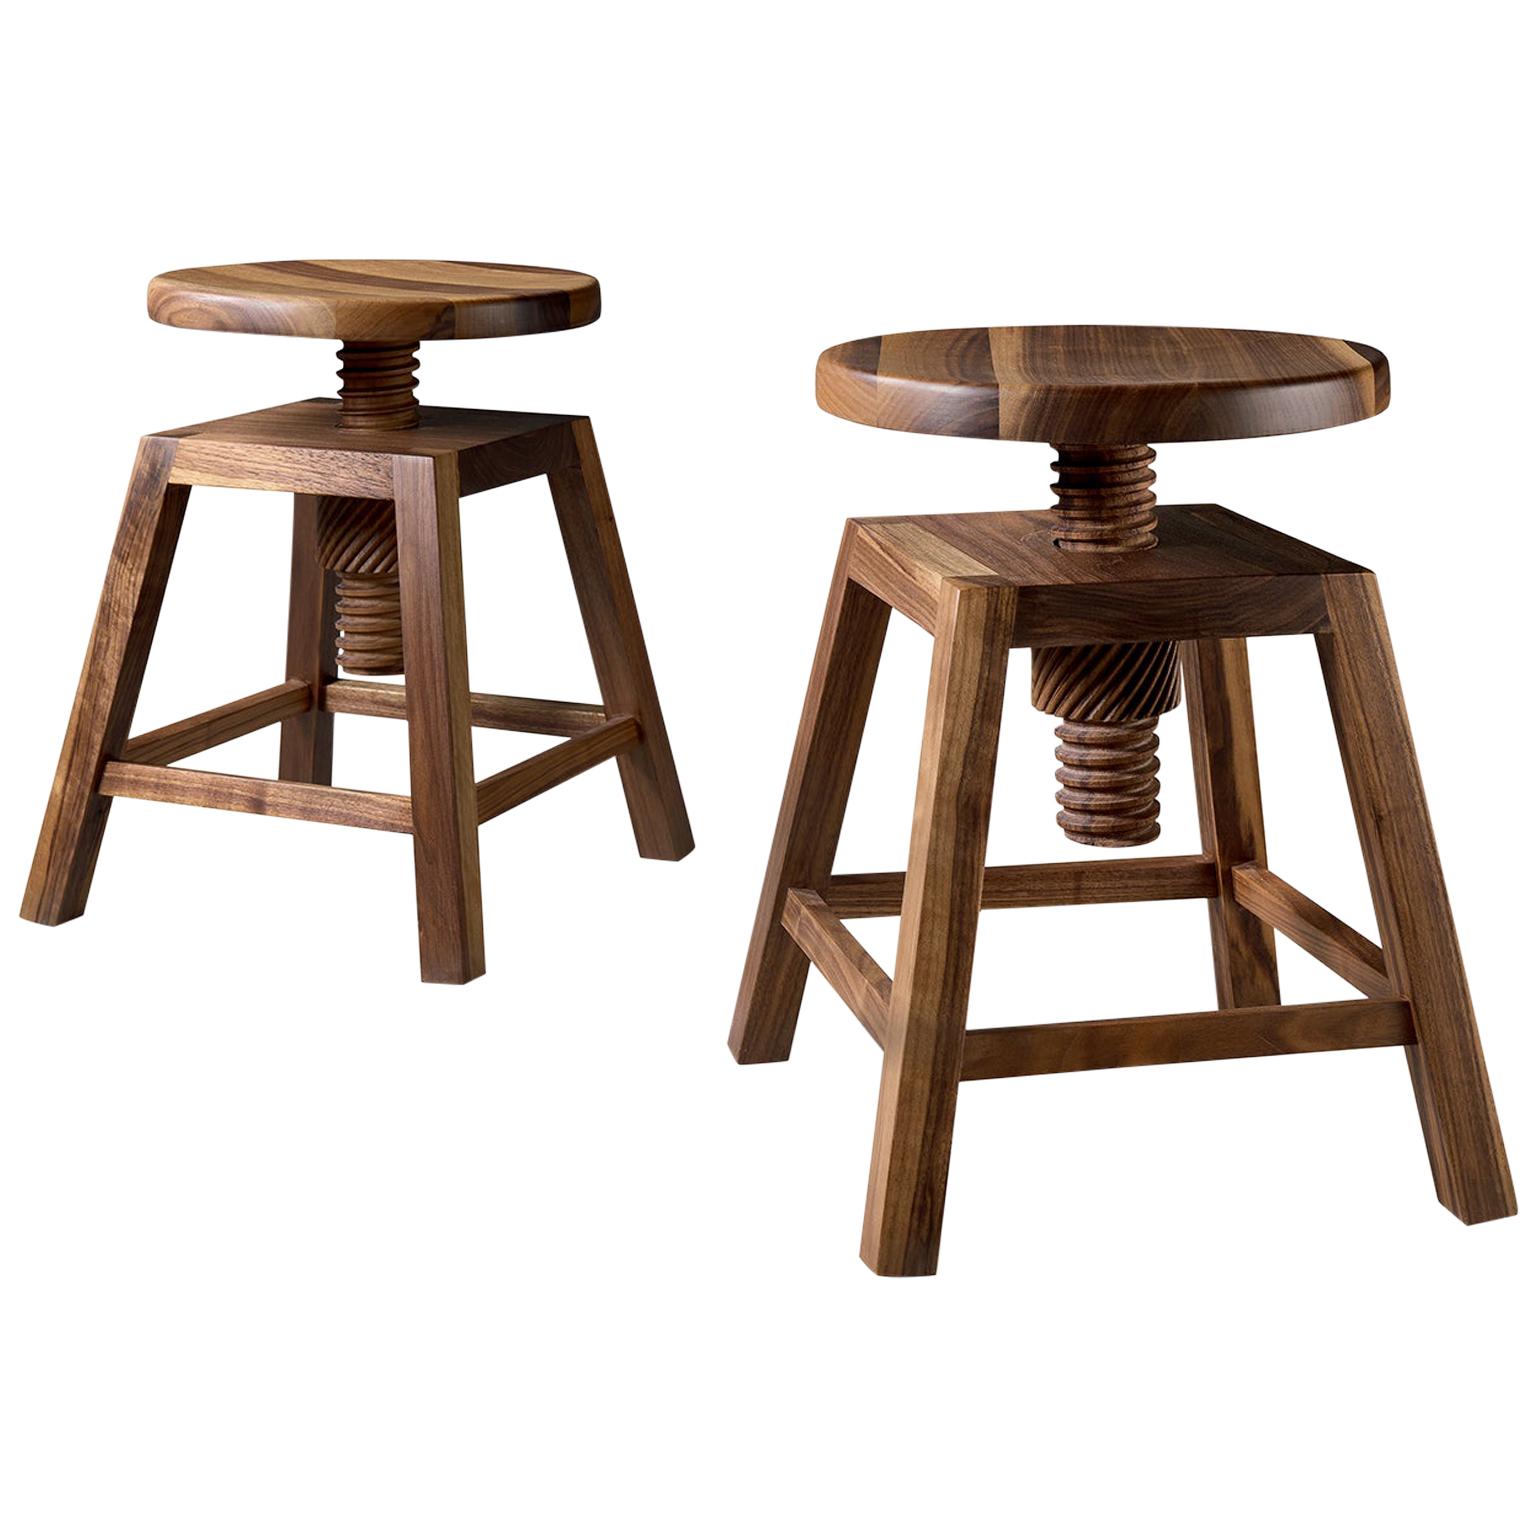 Invito Solid Wood Stool, Walnut in Hand-Made Natural Finish, Contemporary